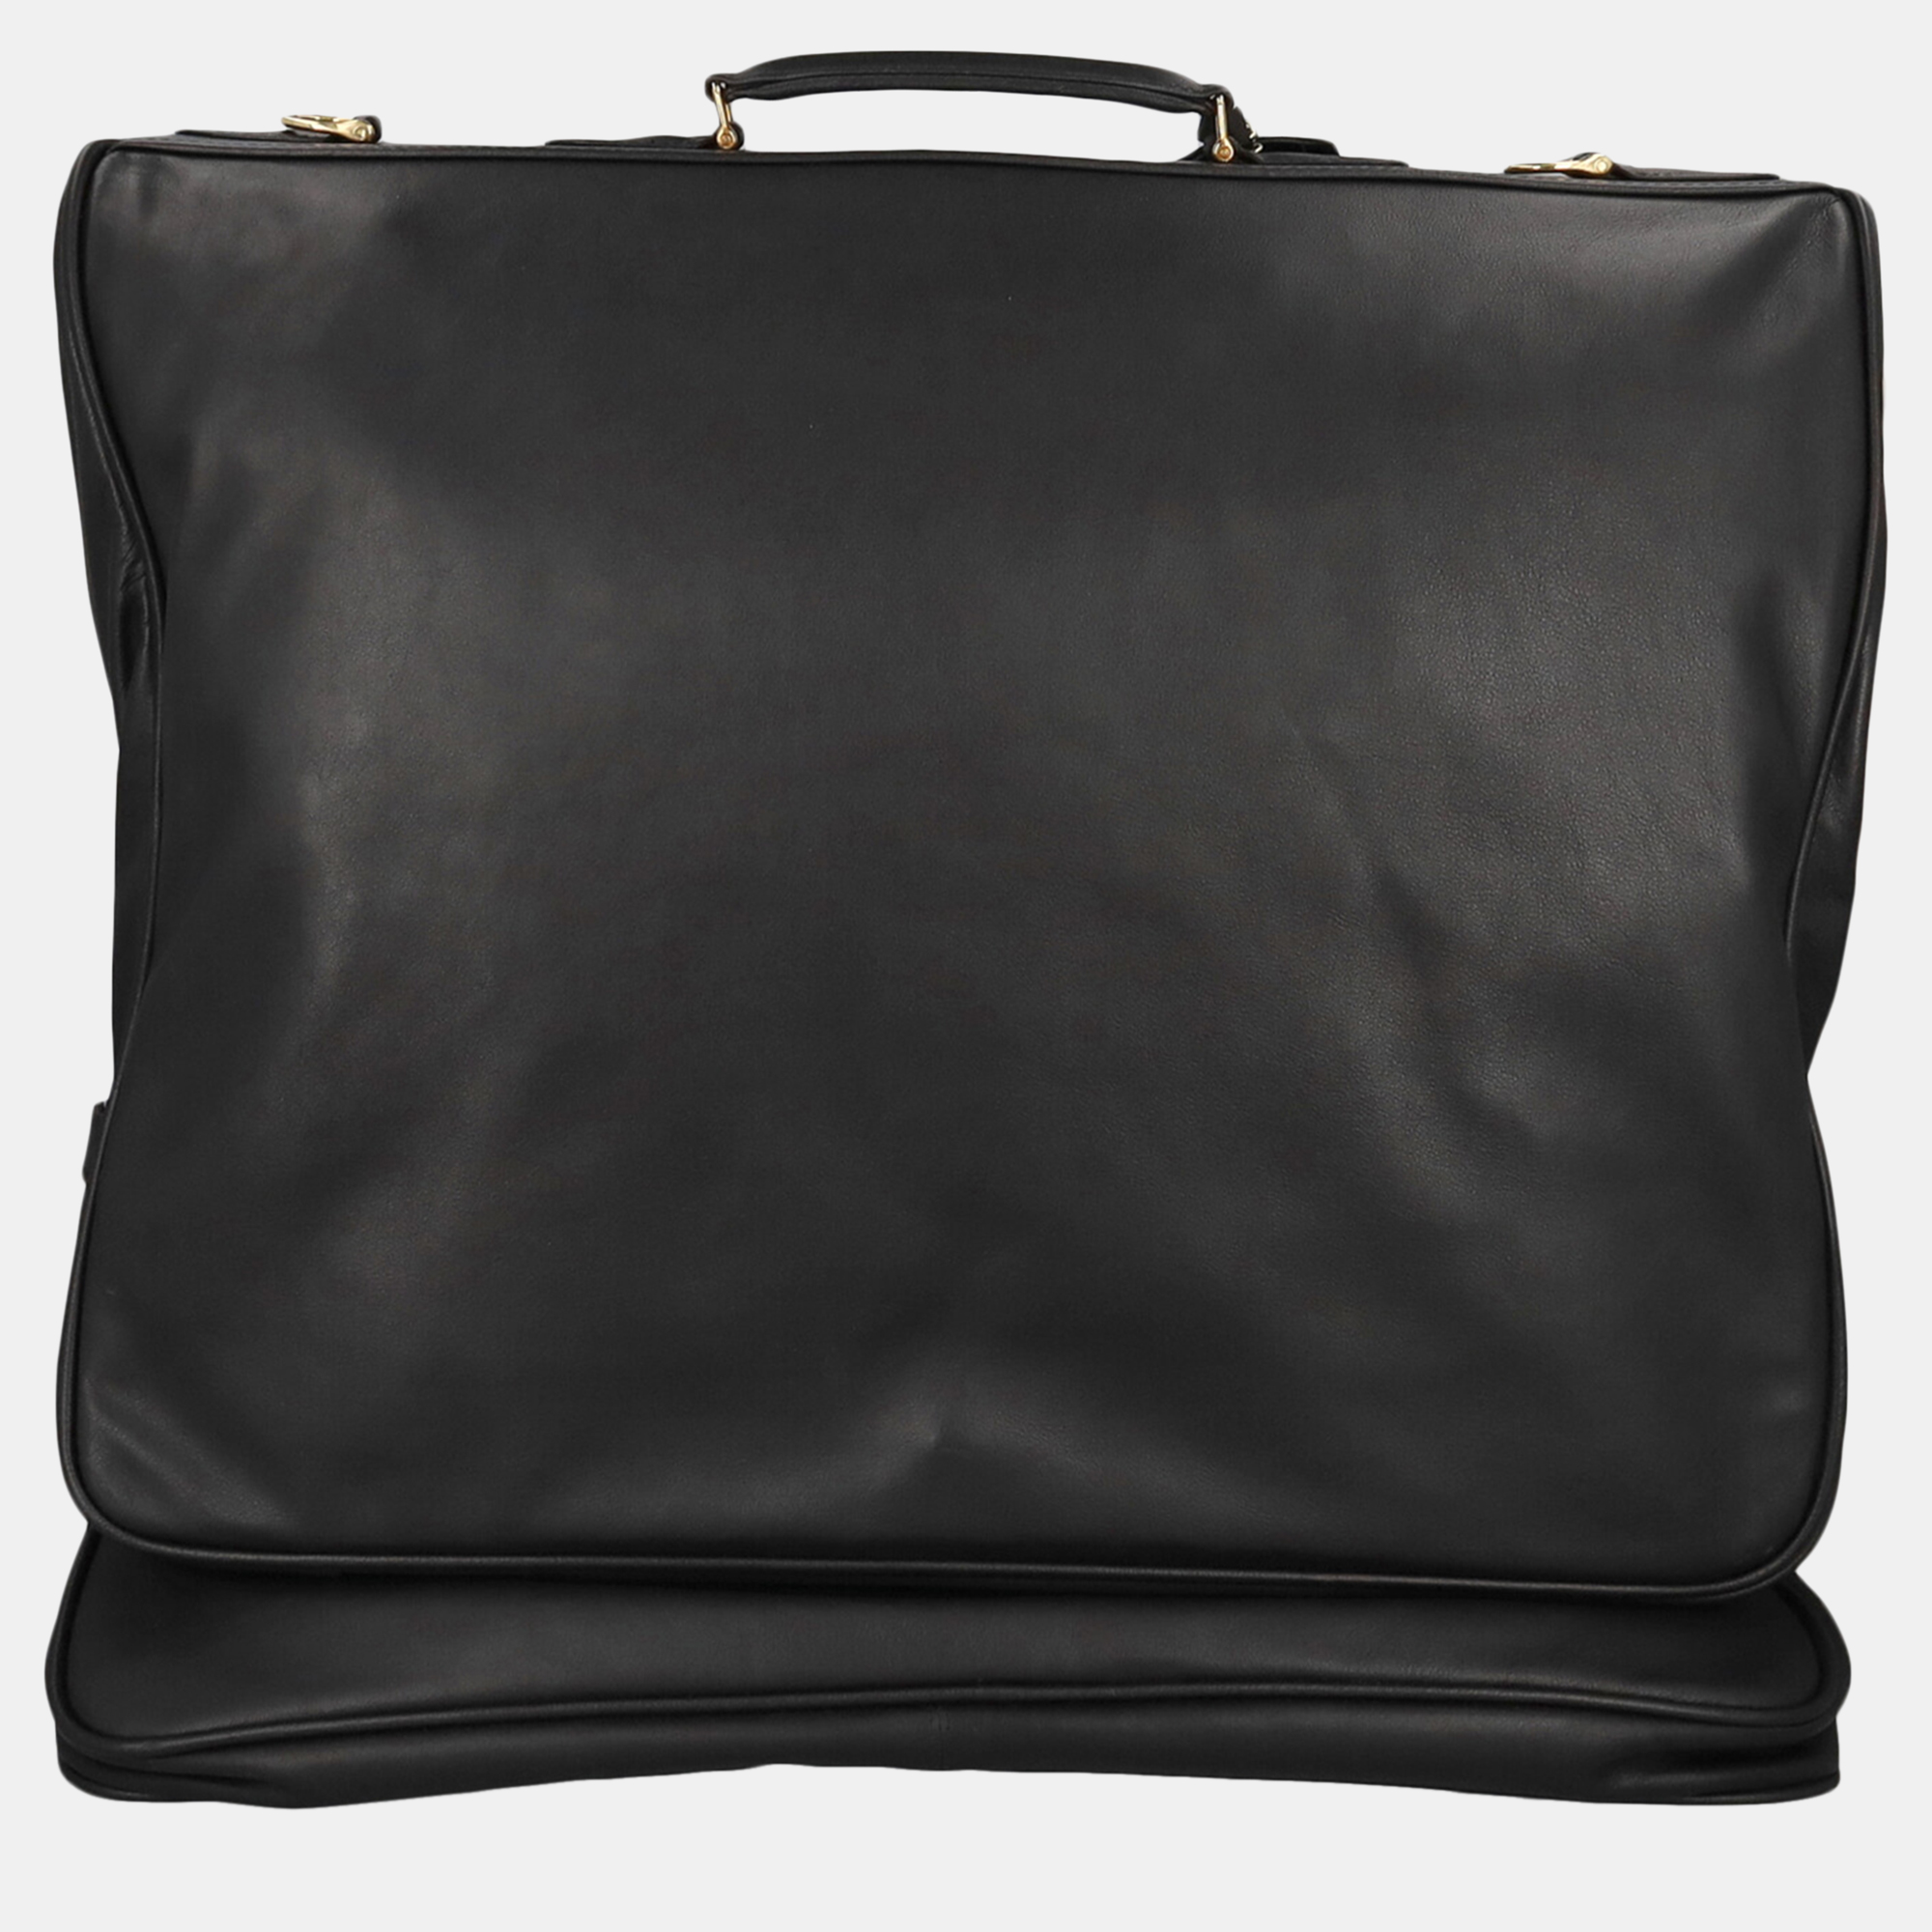 Montblanc  Women's Leather Travel Bag - Black - One Size